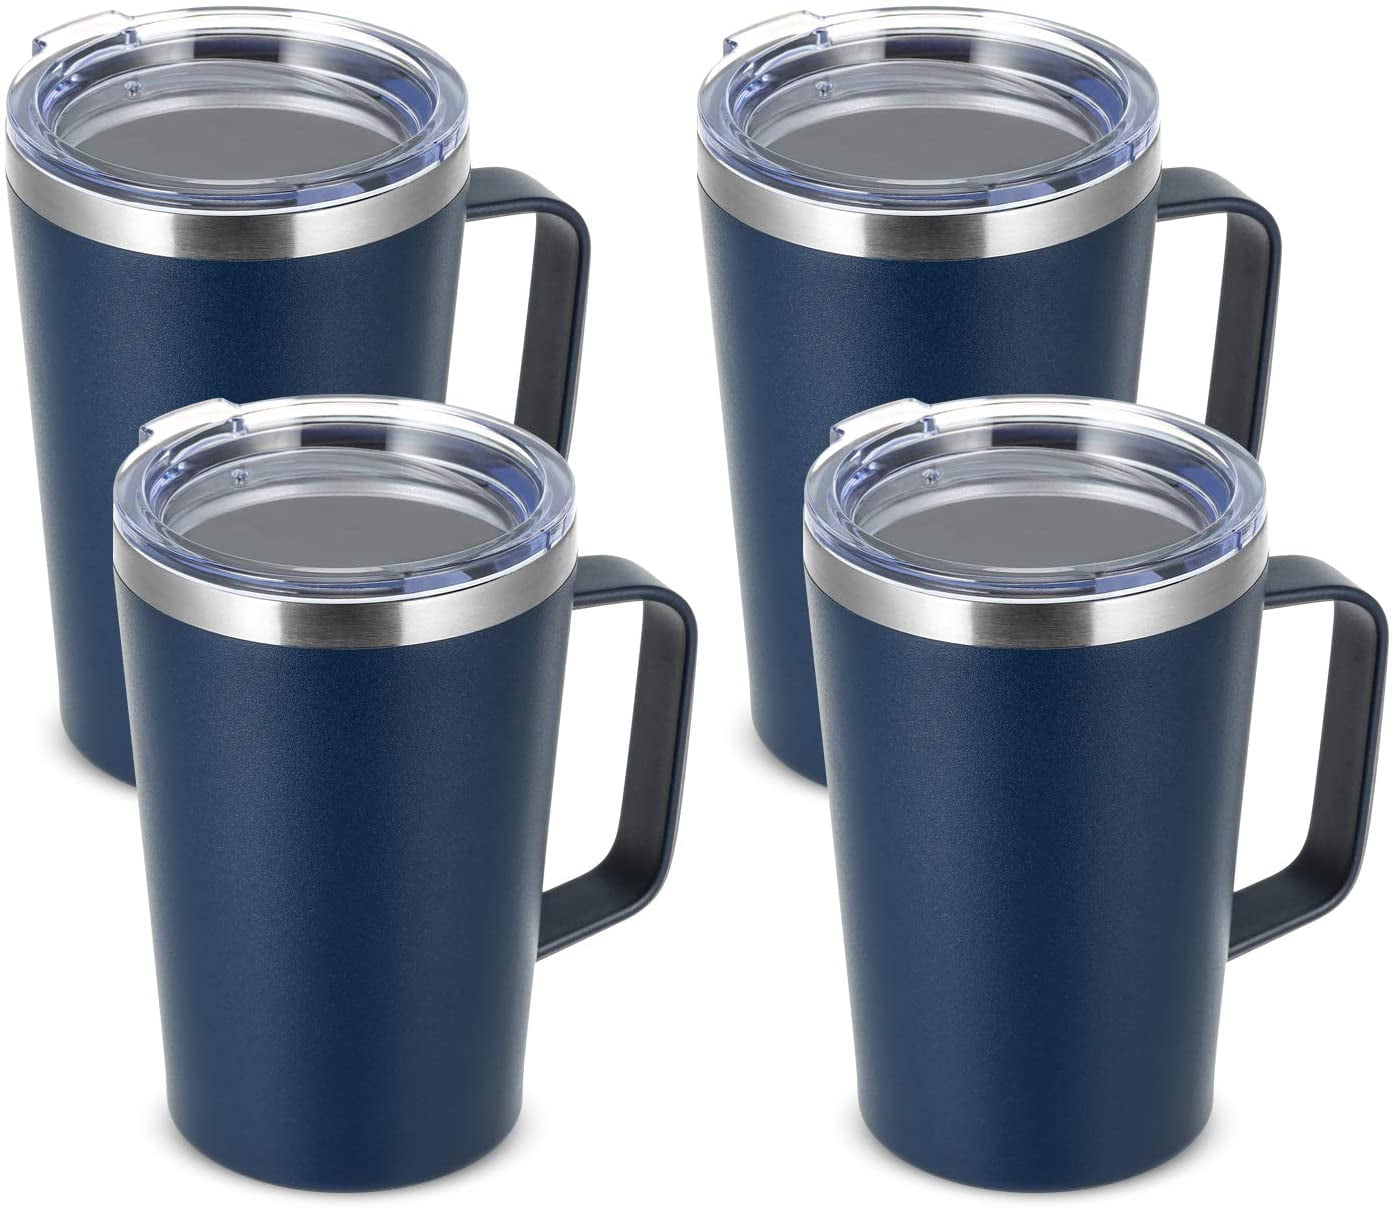 Stainless Steel Insulated Double Wall Travel Coffee Tumbler Mug Cup 16OZ 